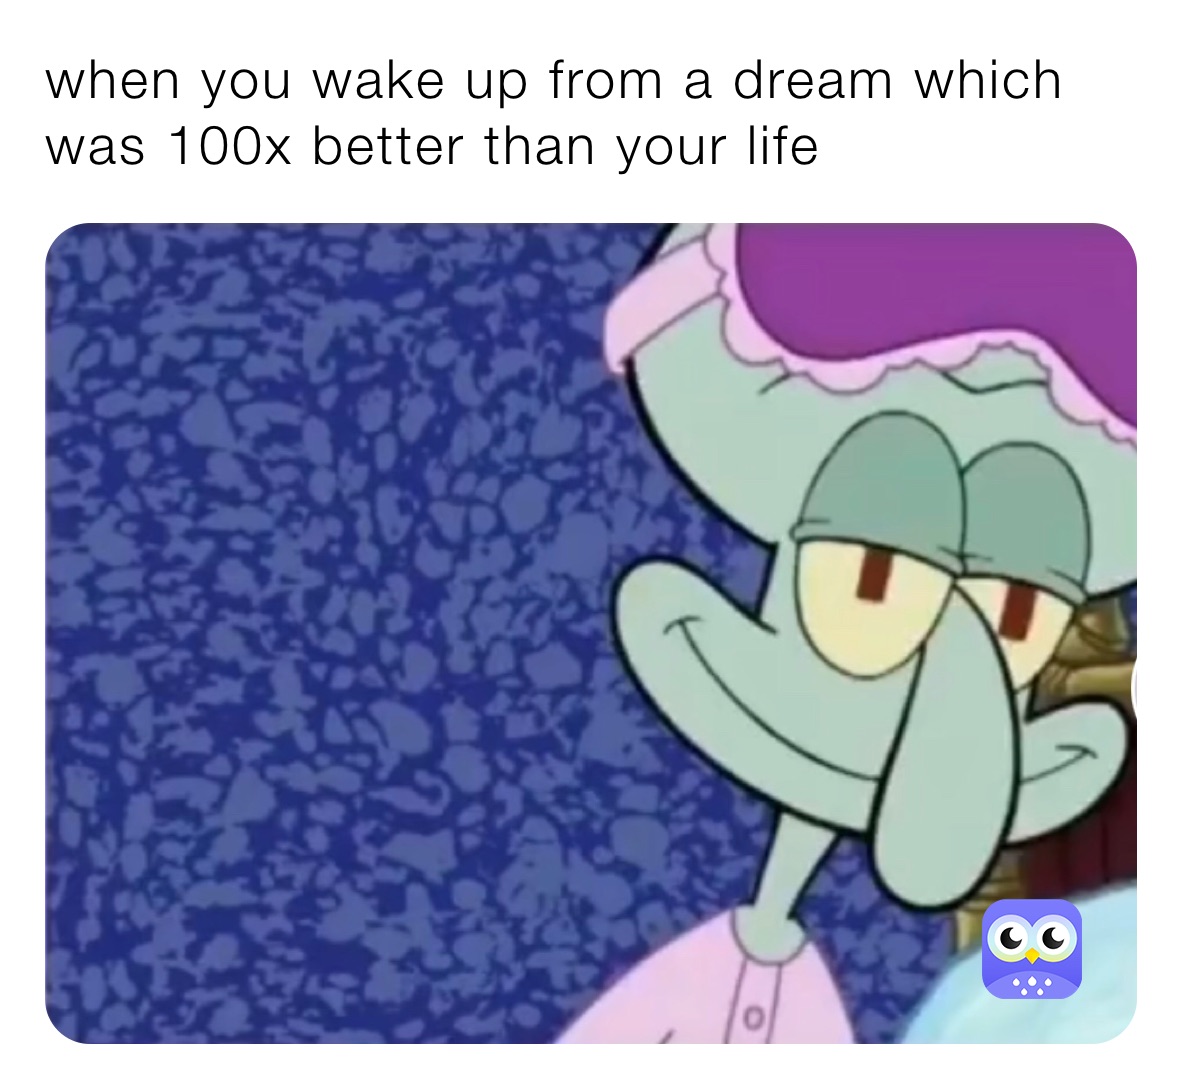 when you wake up from a dream which was 100x better than your life